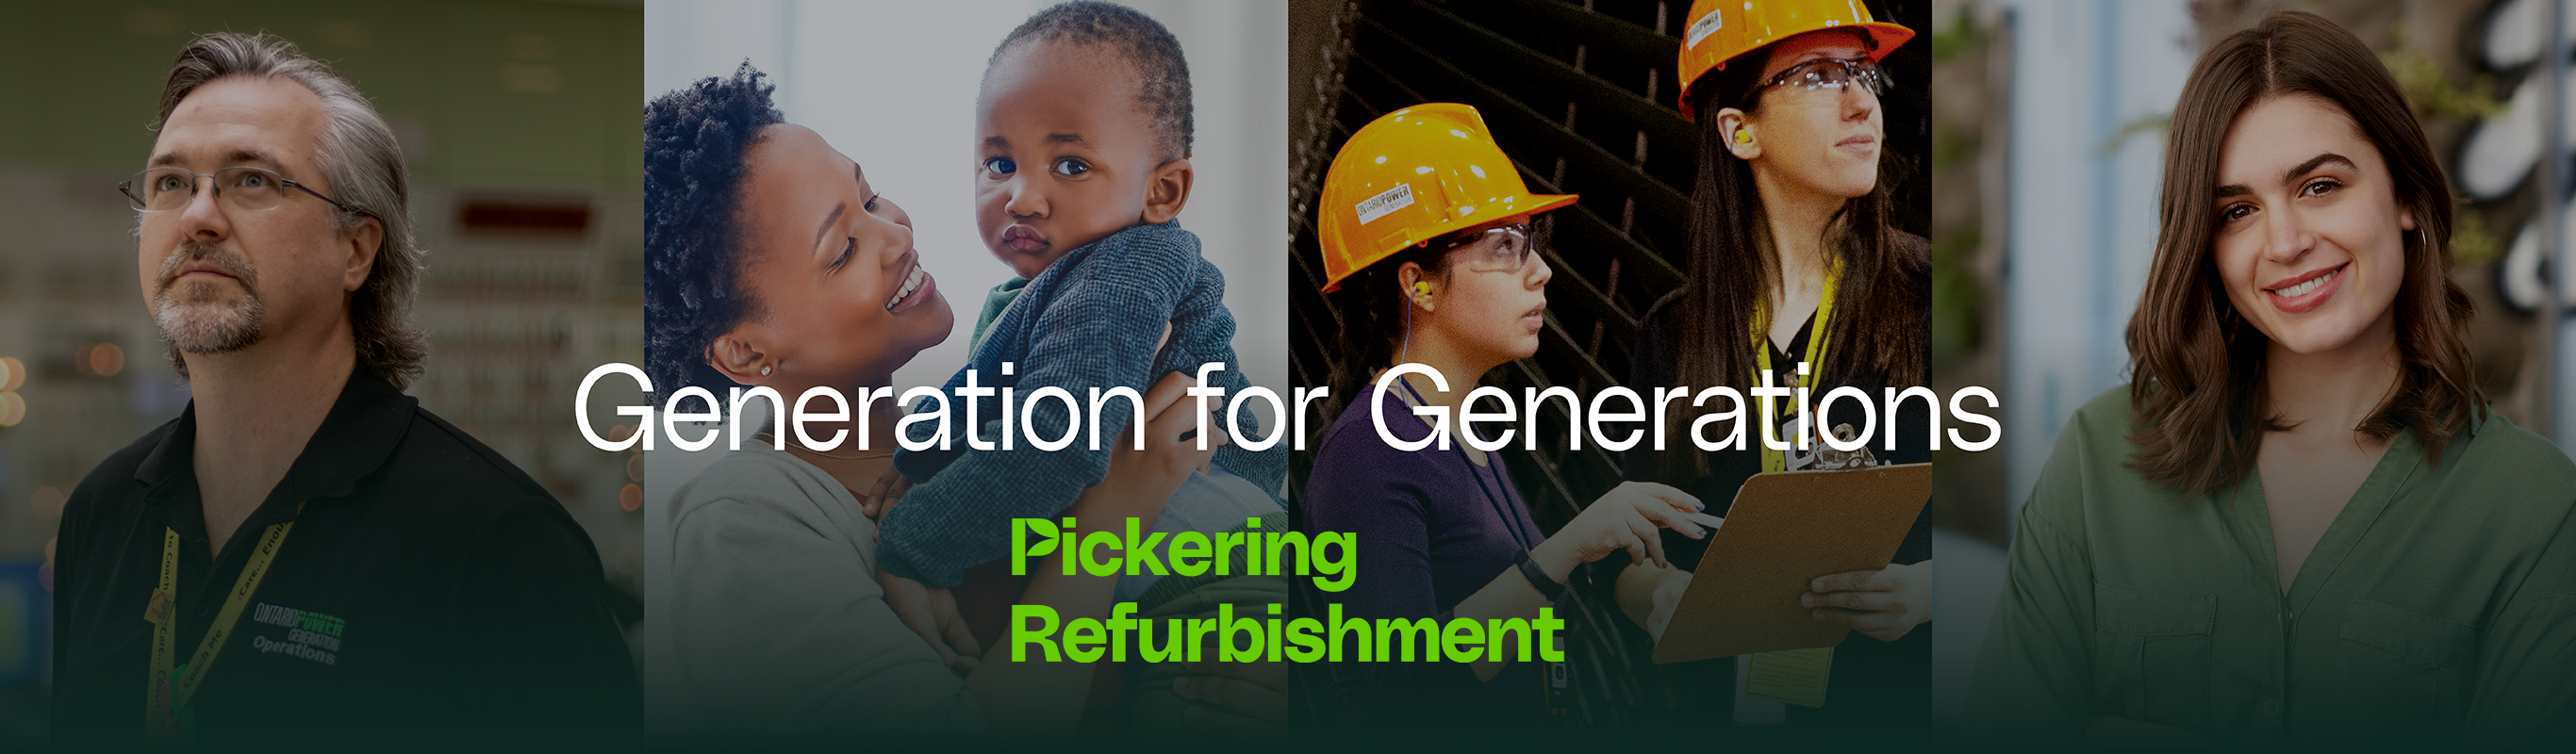 Collage of Pickering Nuclear Generating Station employees and community members representing the generation for generations that the Pickering Refurbisment project will deliver.